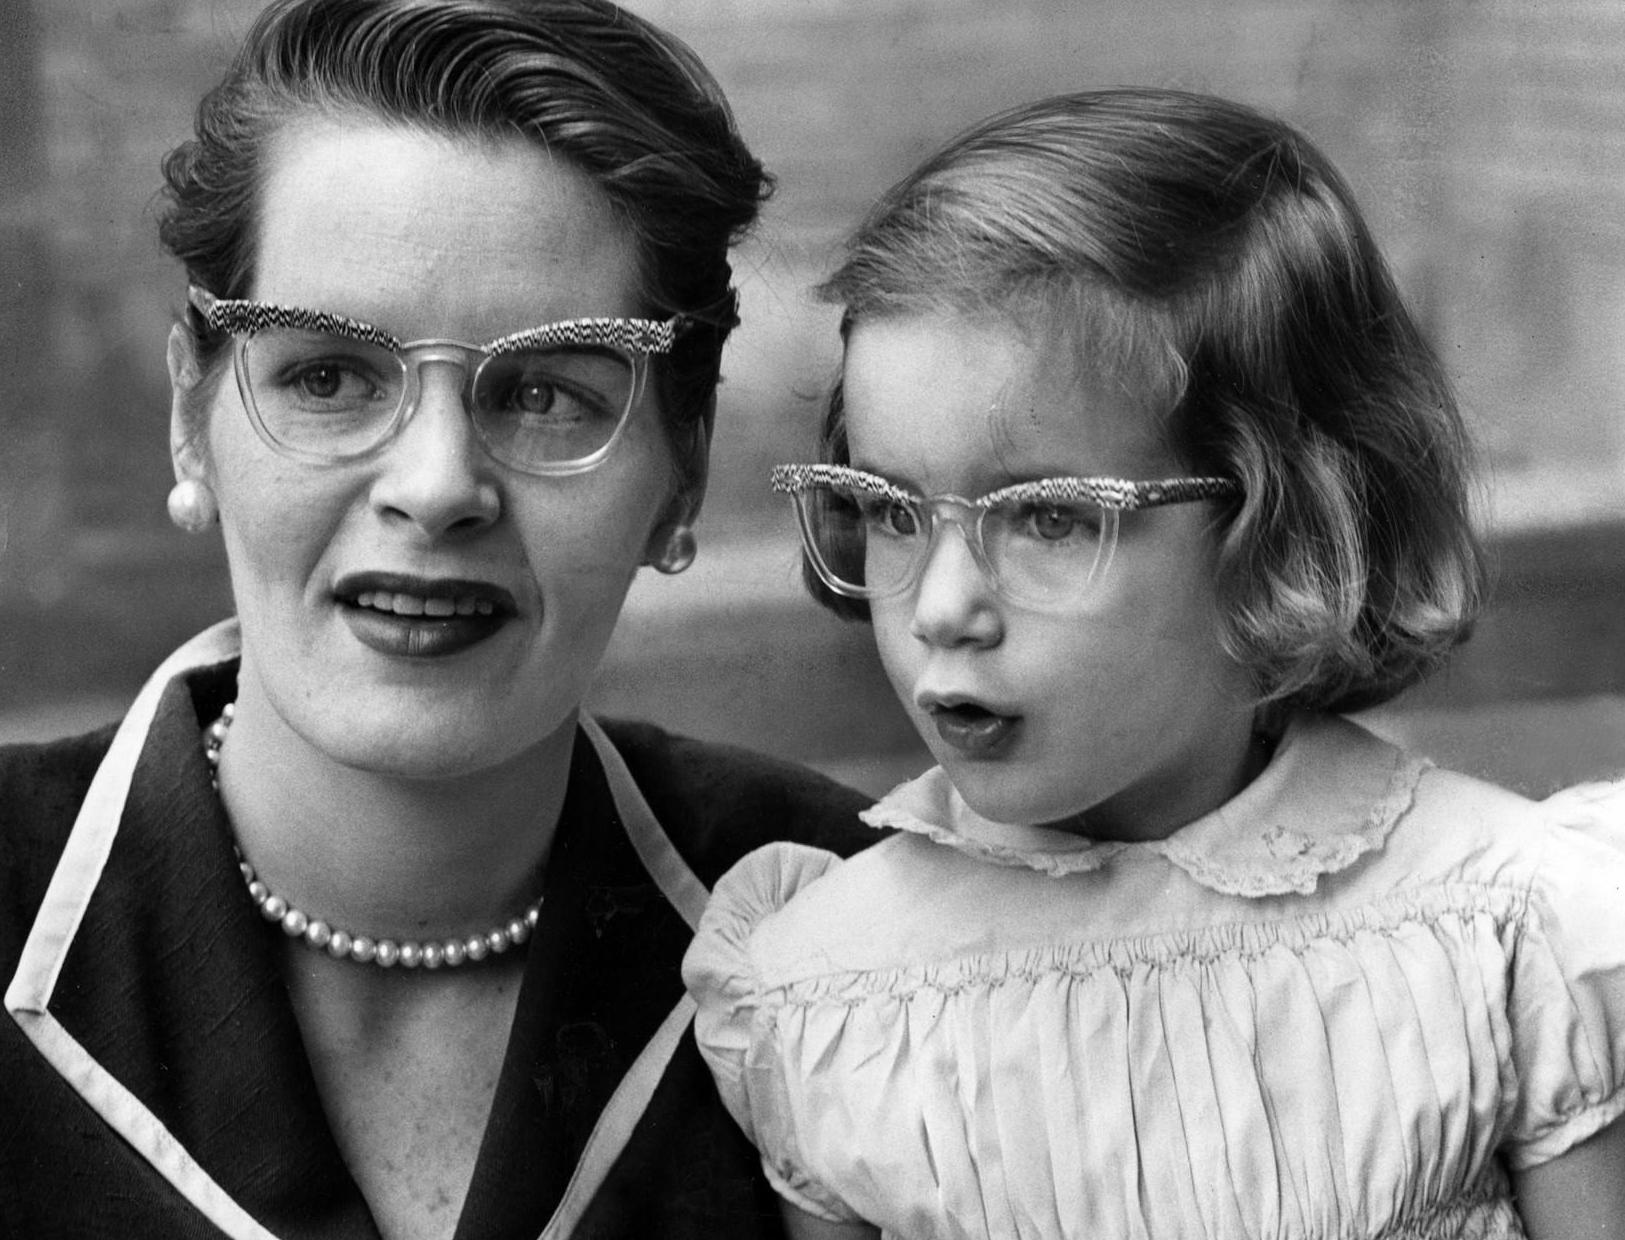  mother and daughter wearing eyeglasses 